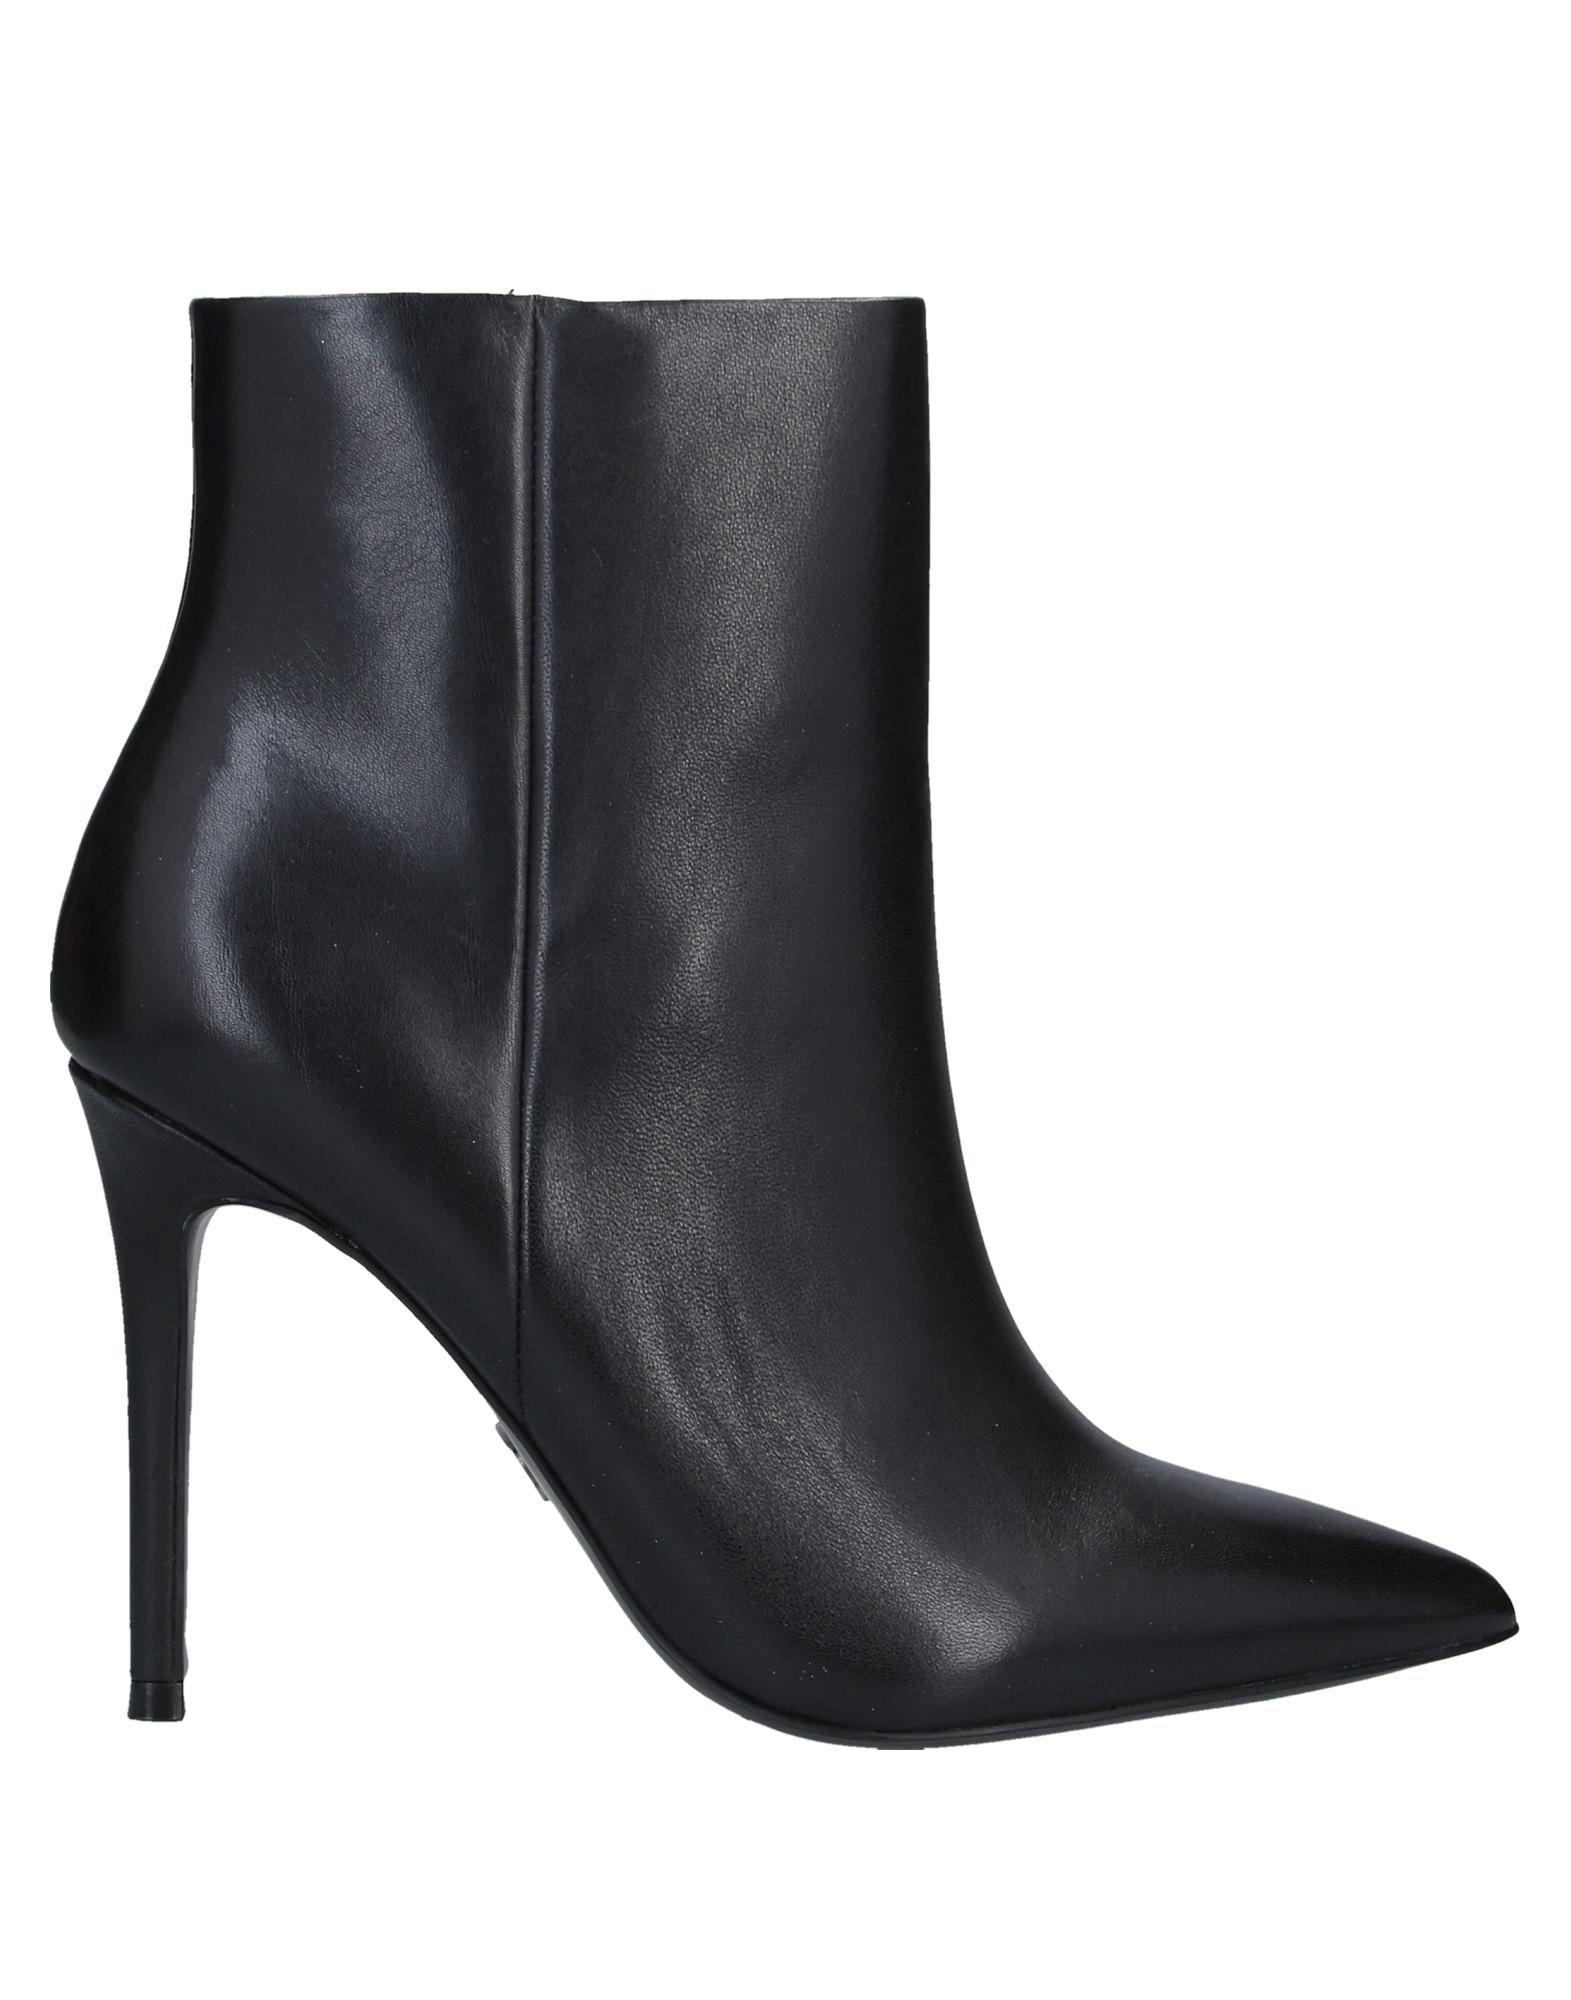 Windsor Smith Ankle Boots in Black - Lyst